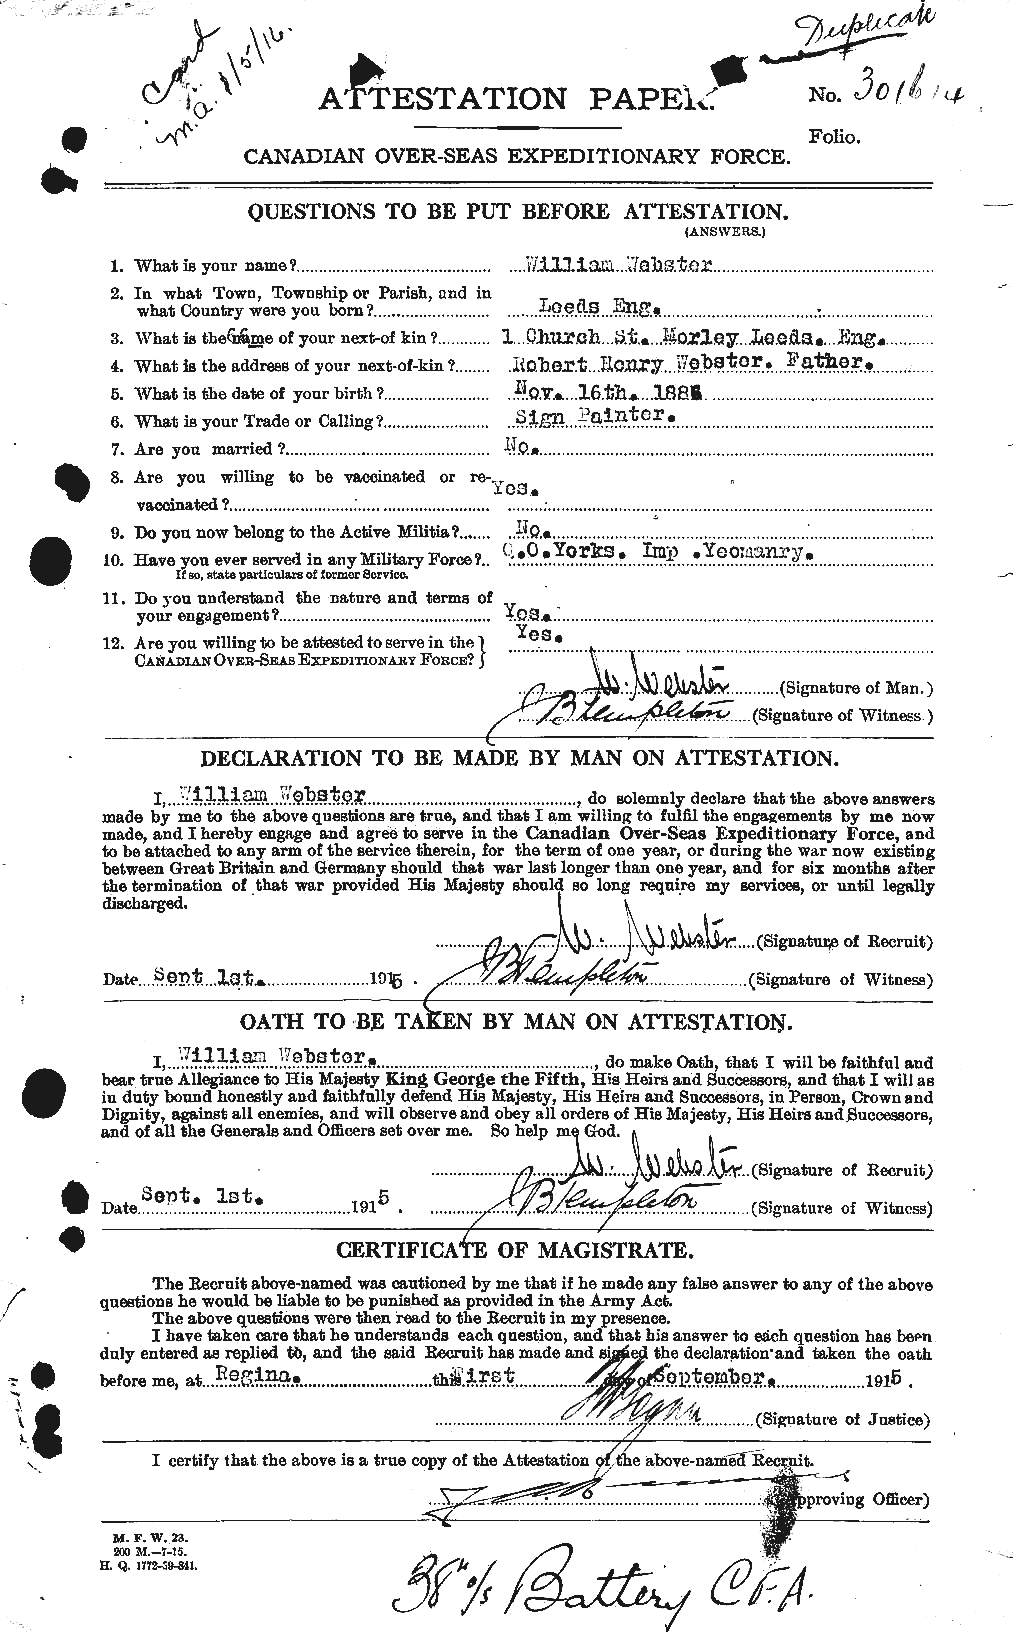 Personnel Records of the First World War - CEF 662021a